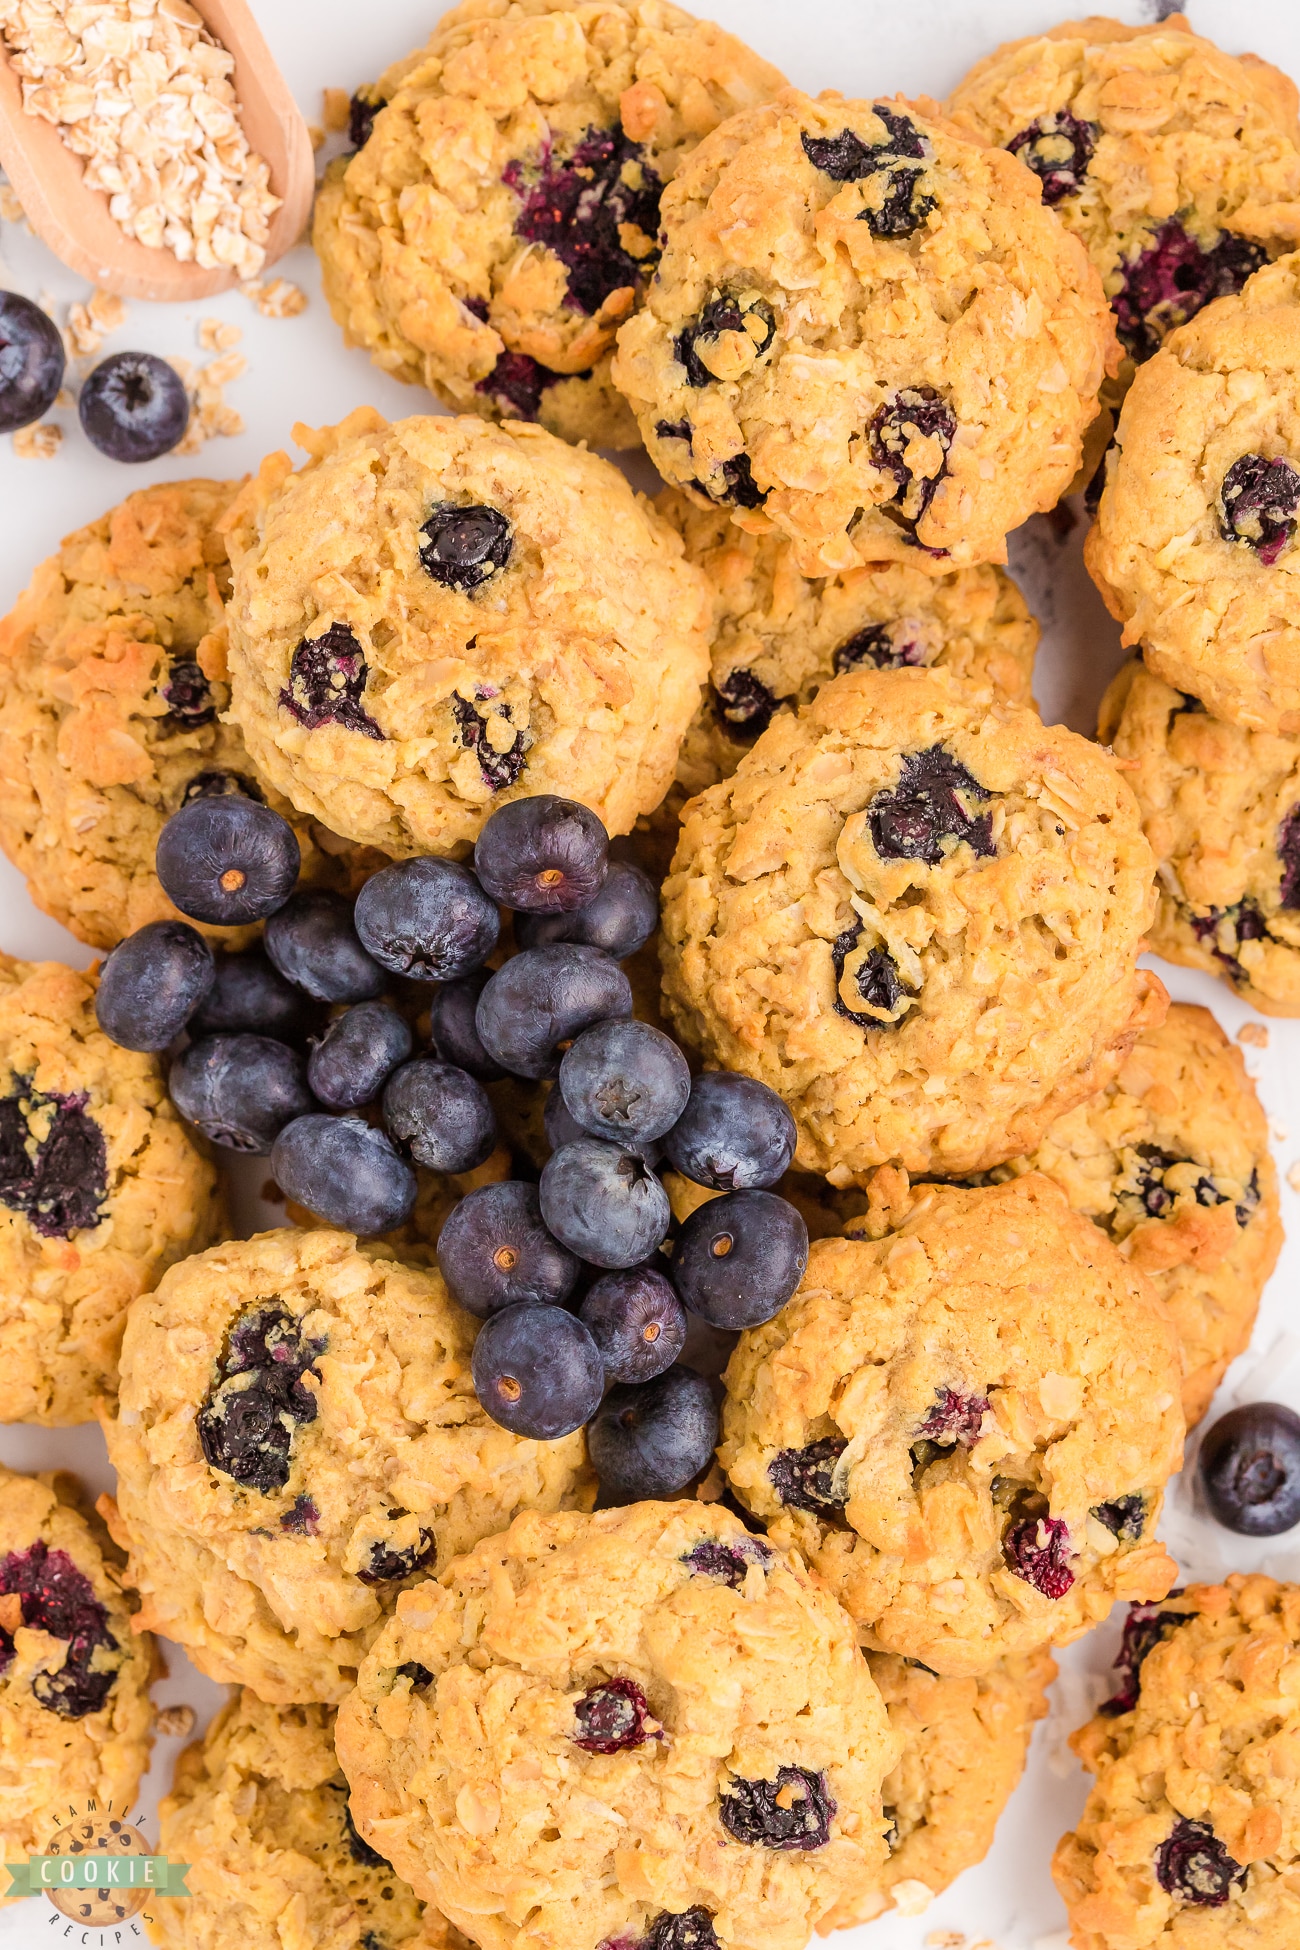 Blueberry coconut oatmeal cookies made with pudding mix